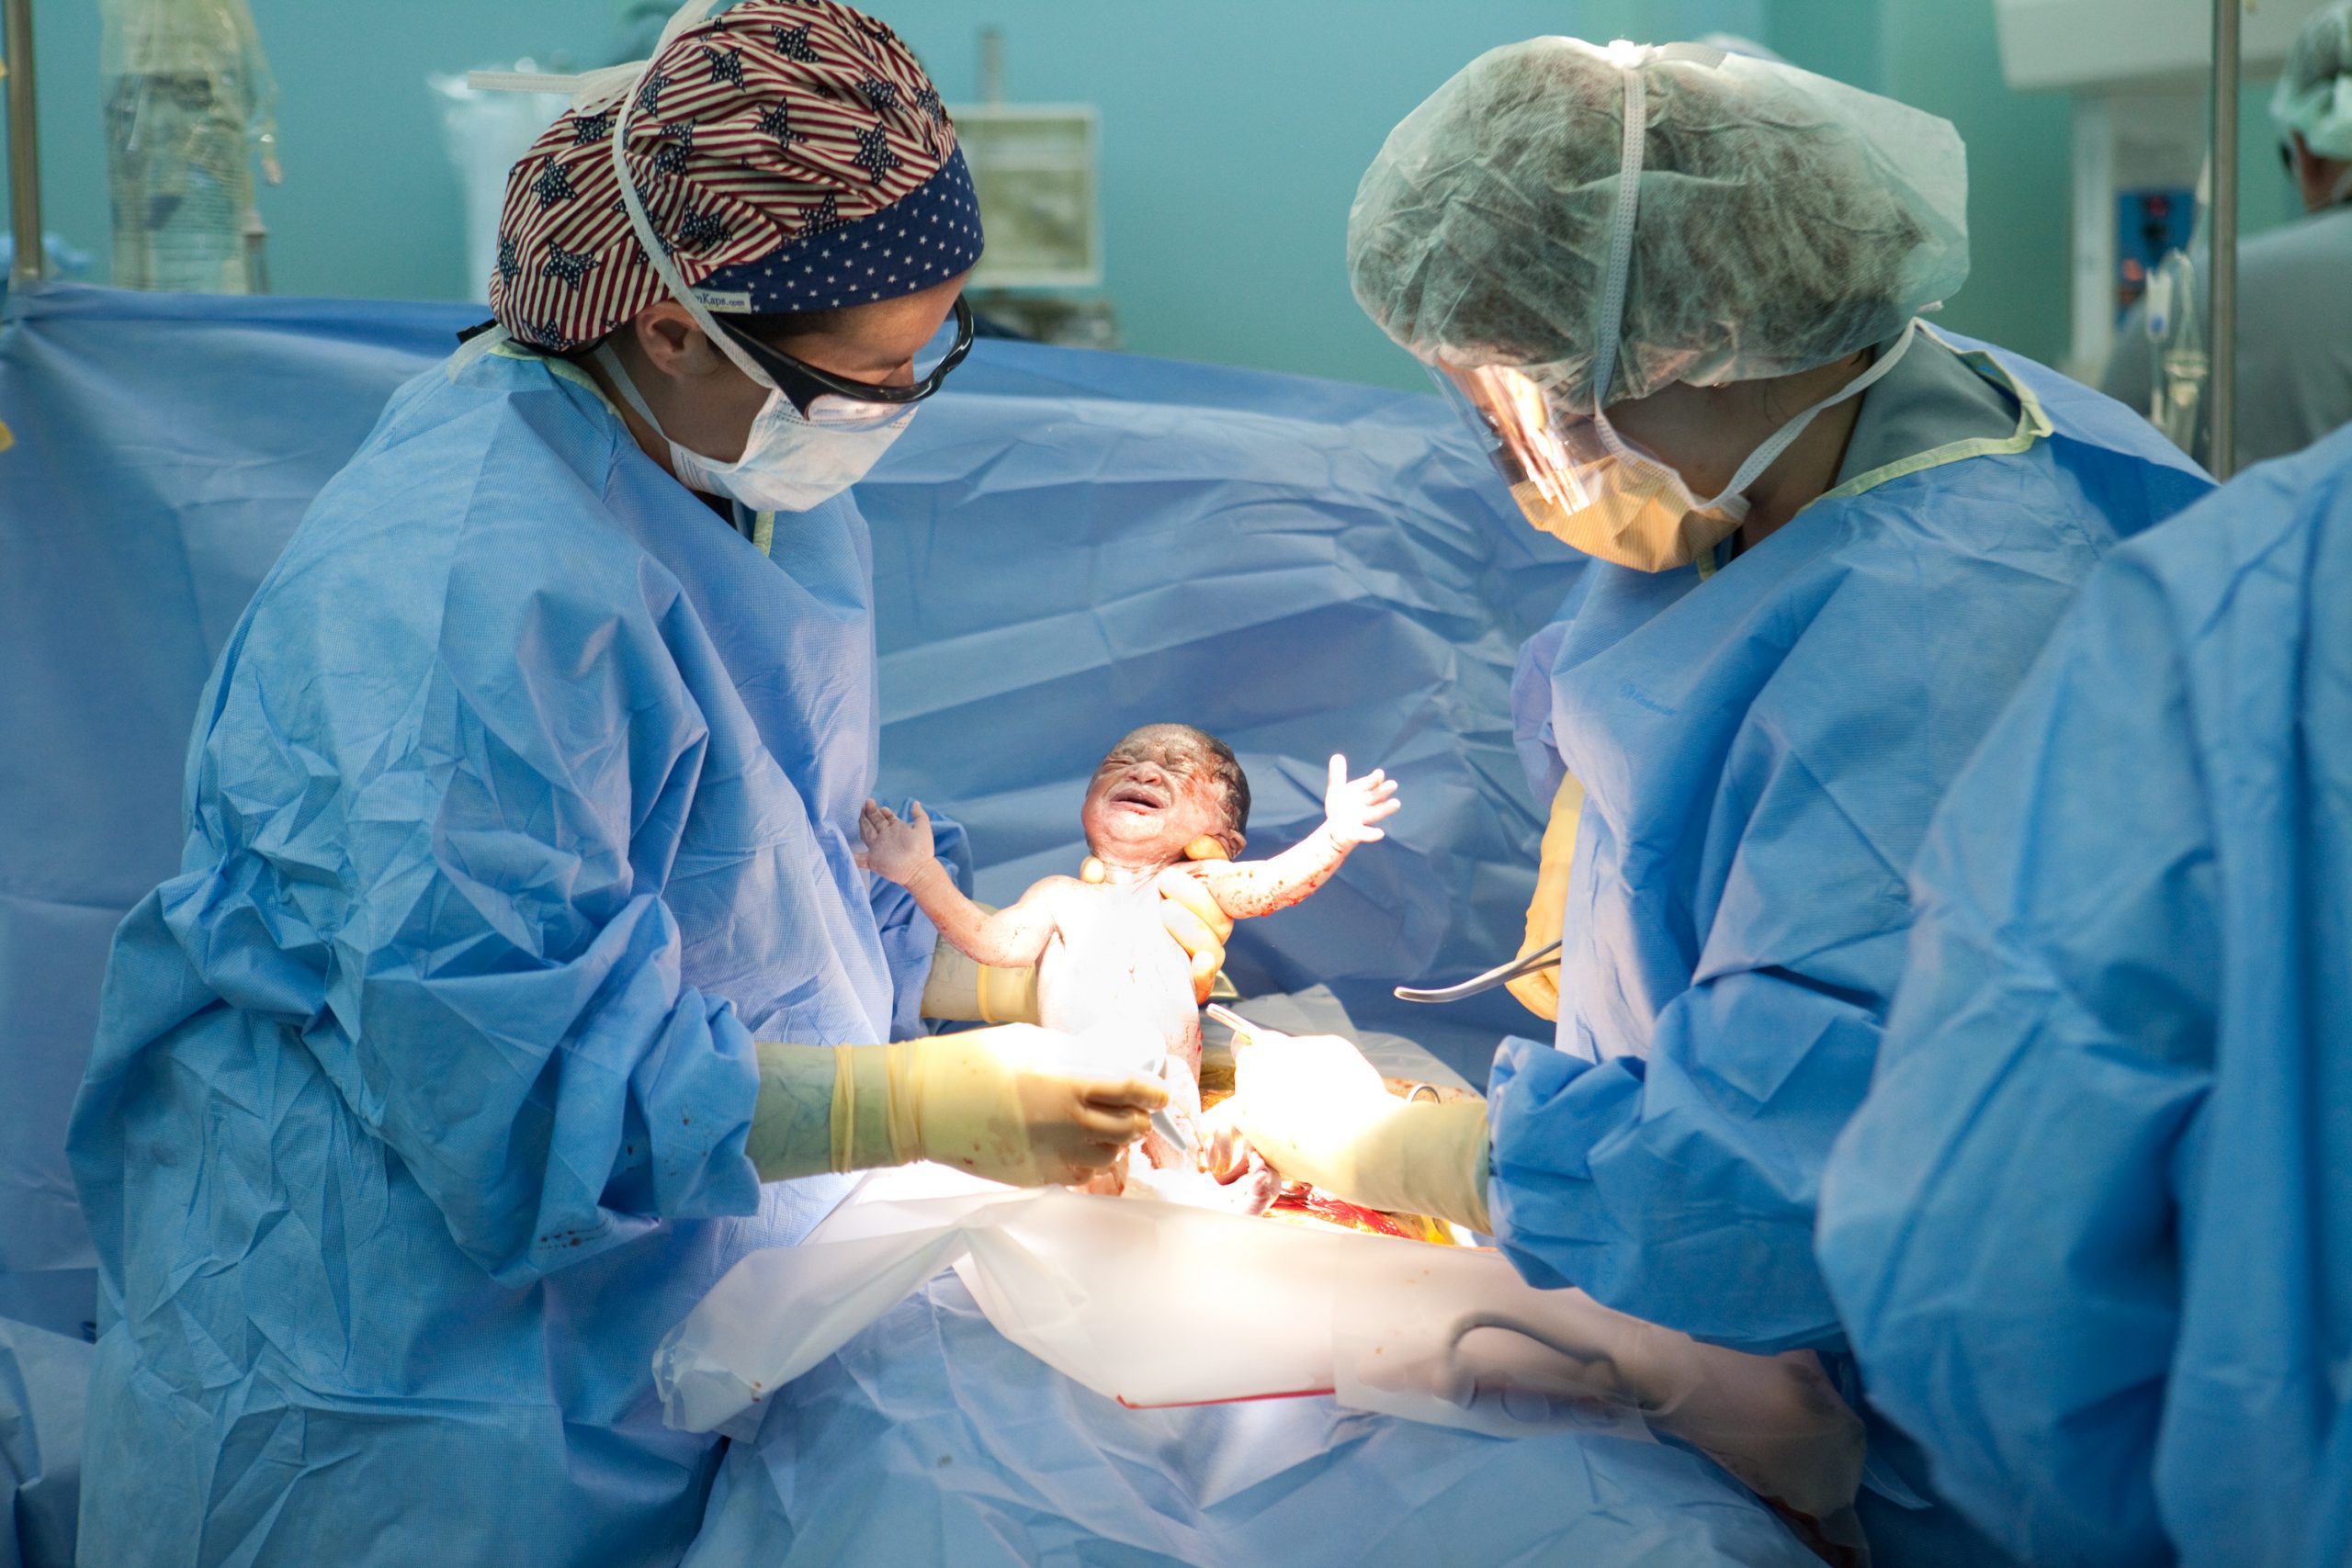 C-Section Linked To A Higher Risk Of Cardiovascular Diseases, Obesity In Children